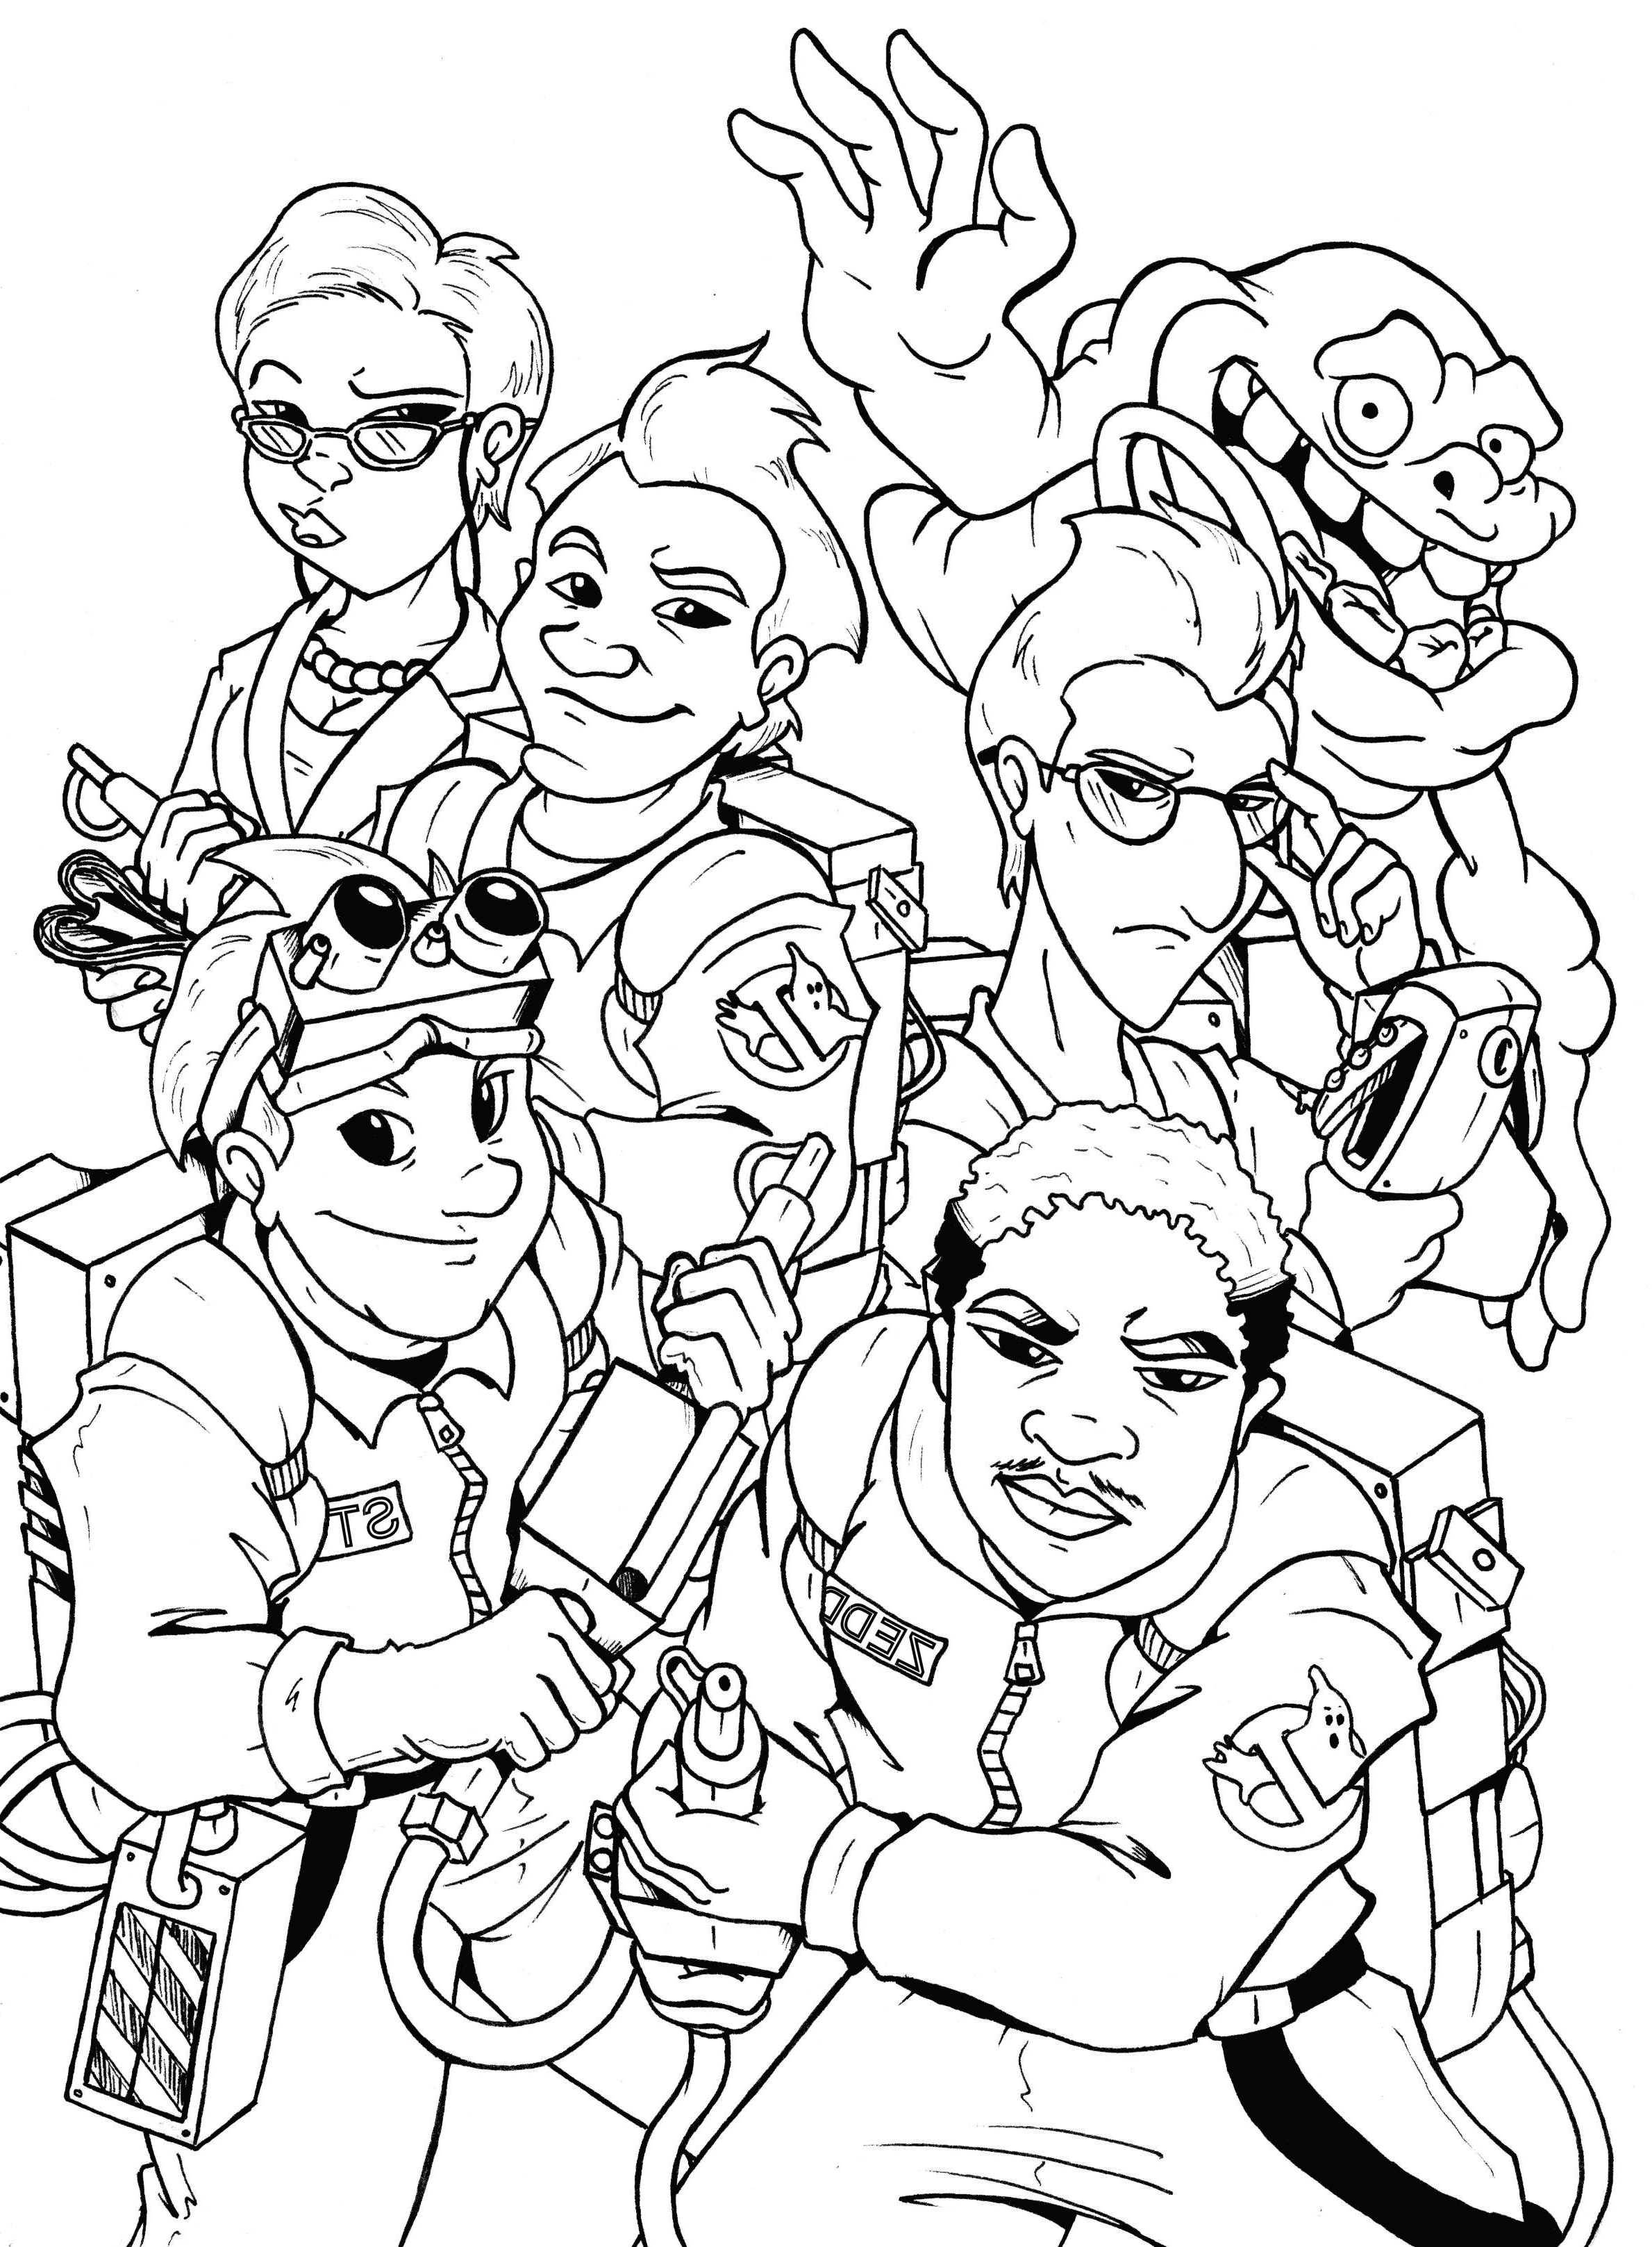 Download Drawing 5 From Ghostbusters Coloring Page